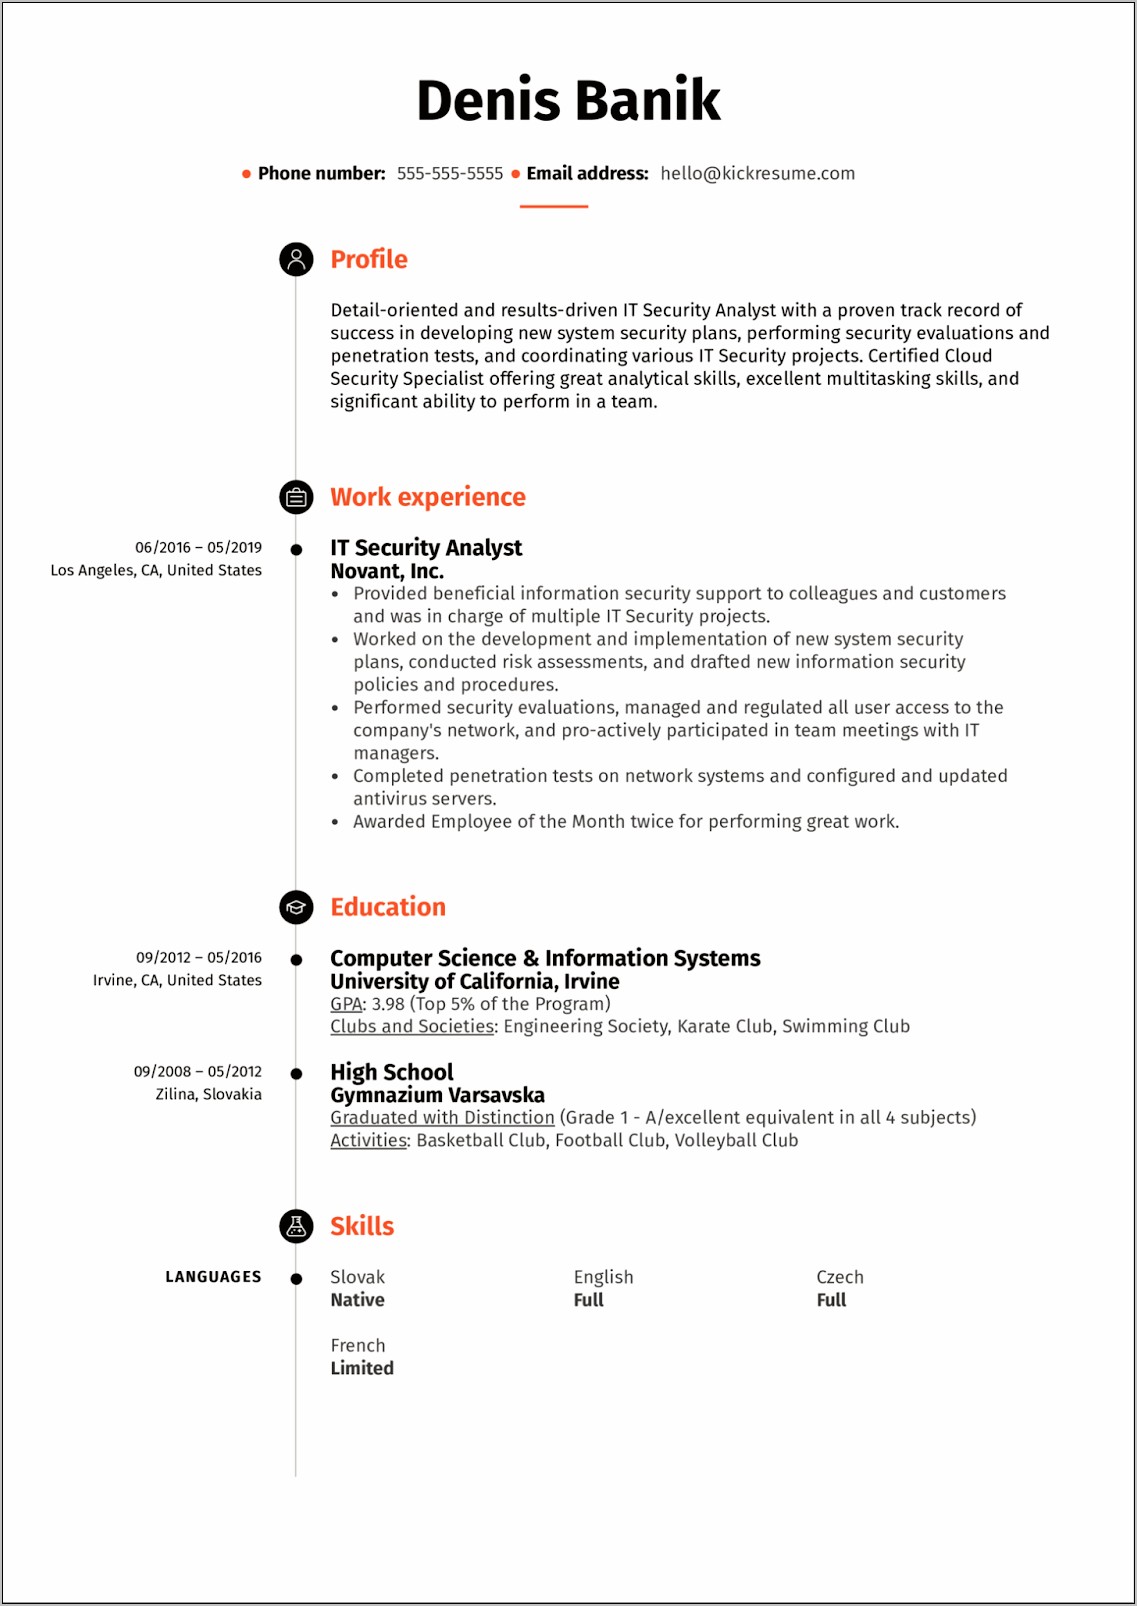 Resume Skill Section Examples Redidt